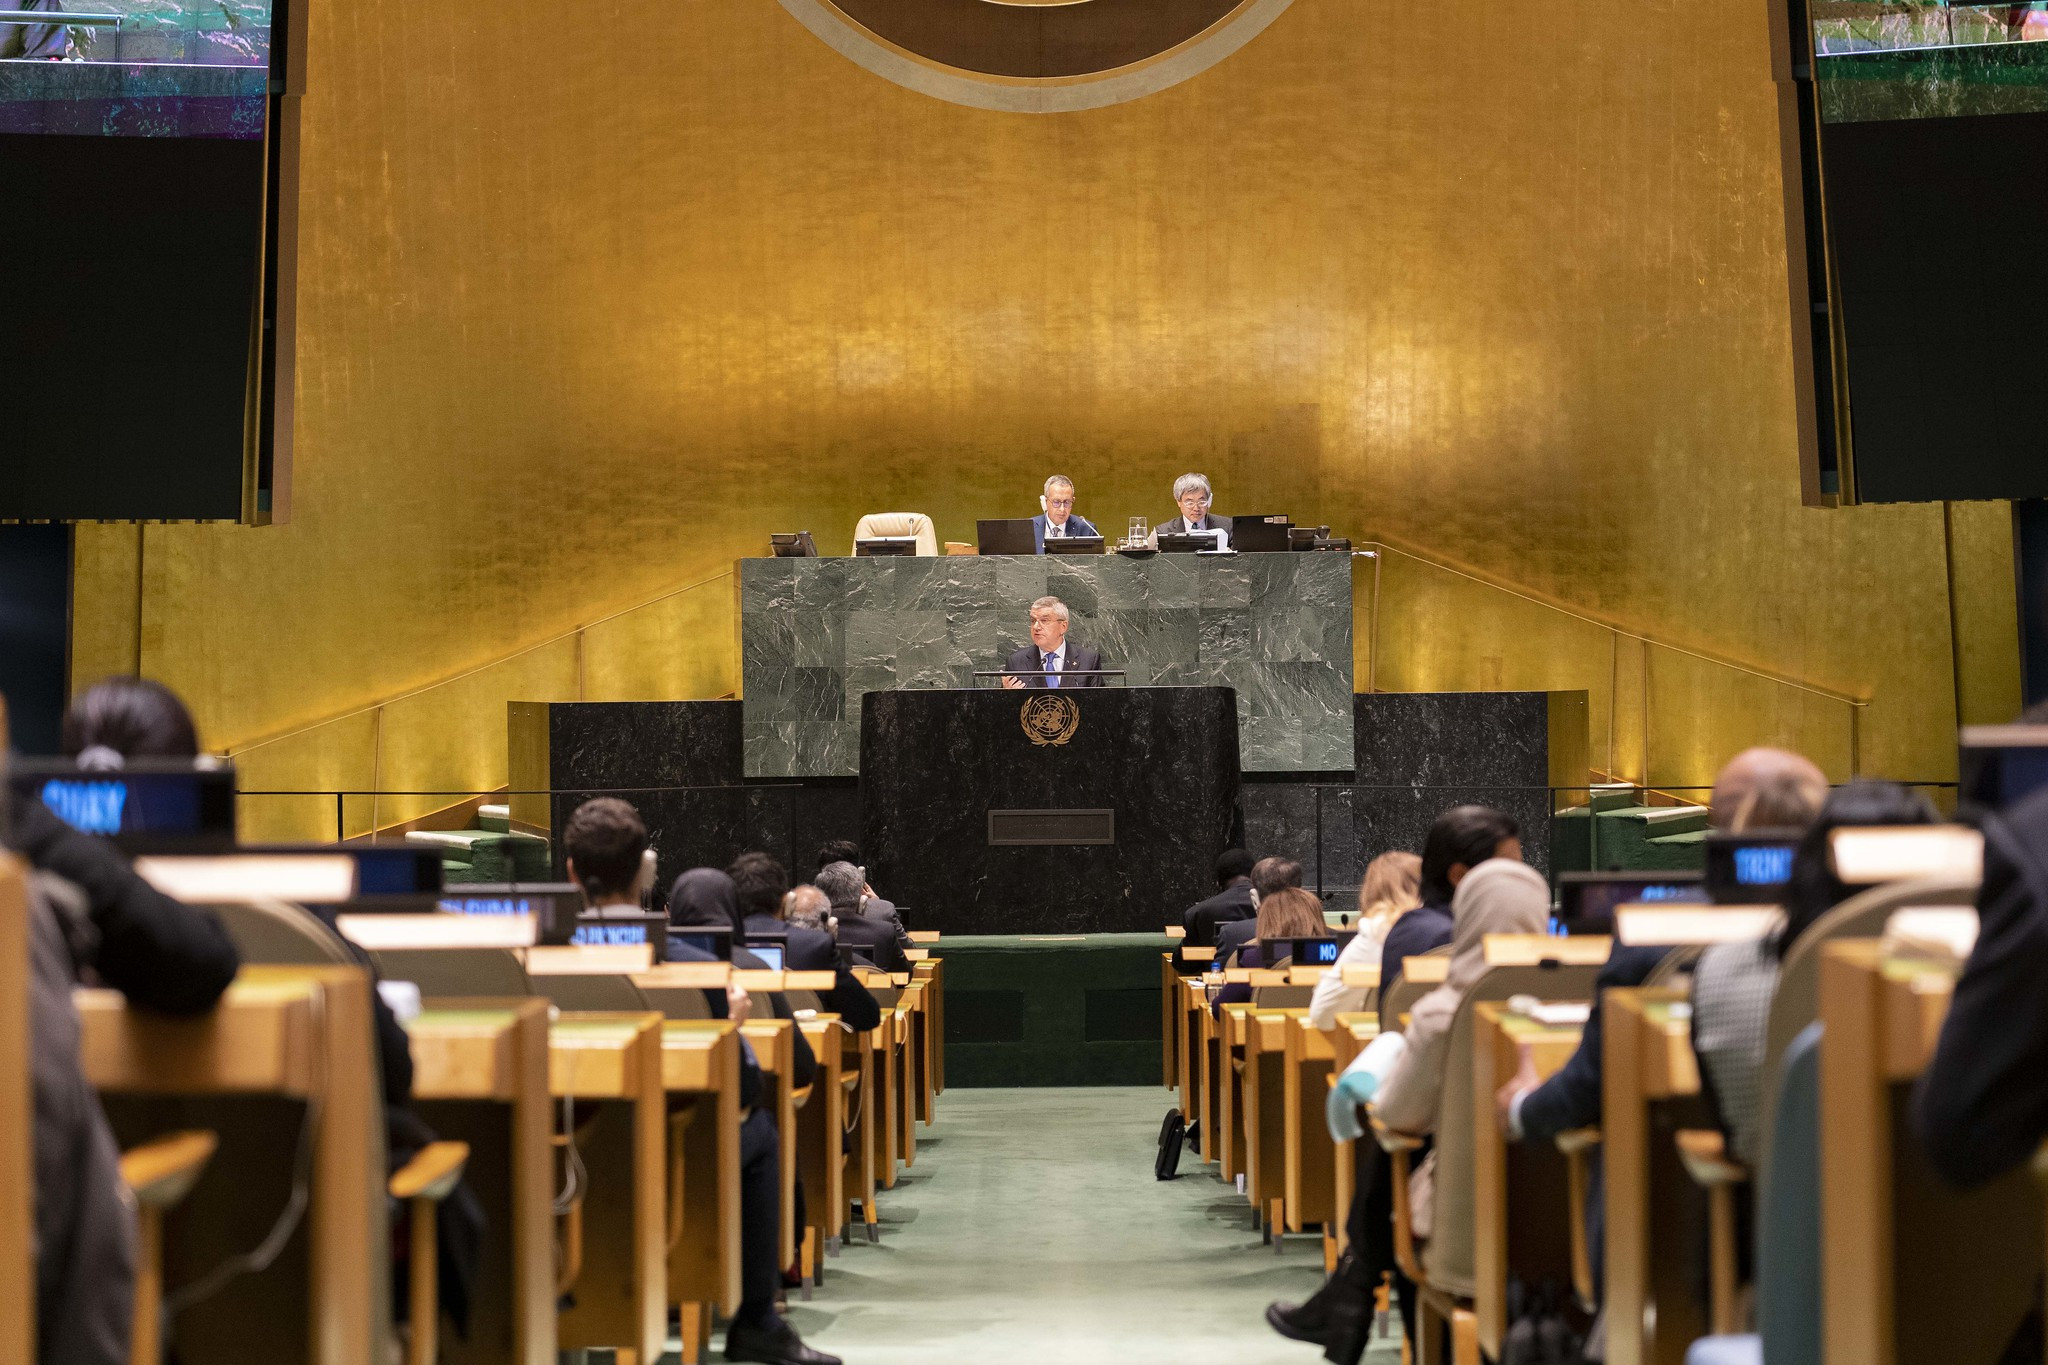 IOC President Thomas Bach addressed the UN General Assembly in New York ©IOC